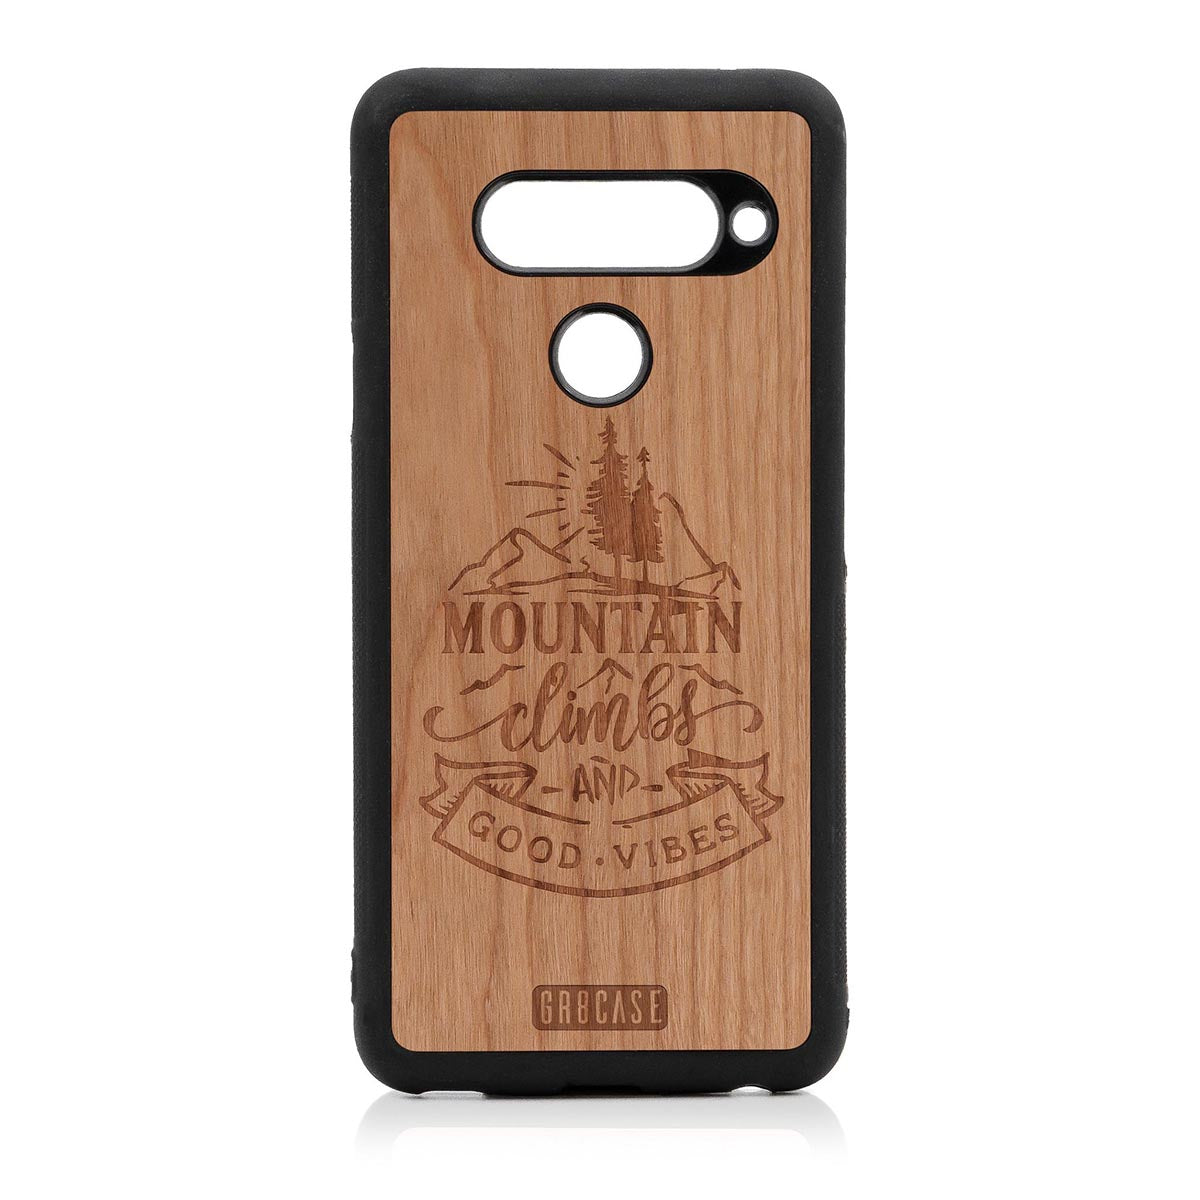 Mountain Climbs And Good Vibes Design Wood Case LG V40 by GR8CASE